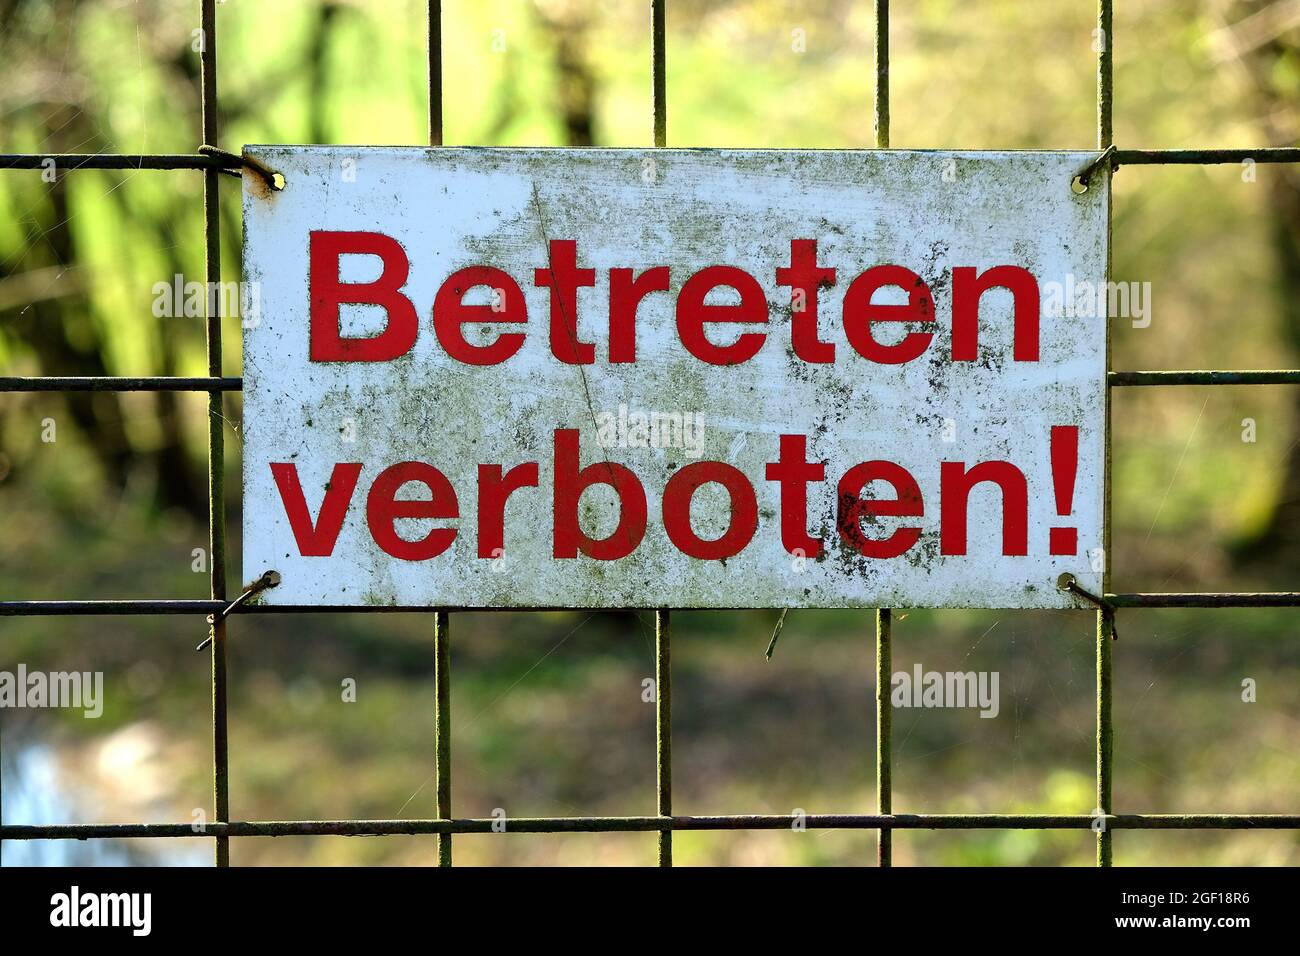 A sign in German "Betreten verboten" meaning "Entry forbidden" is fixed on a metal mesh Stock Photo